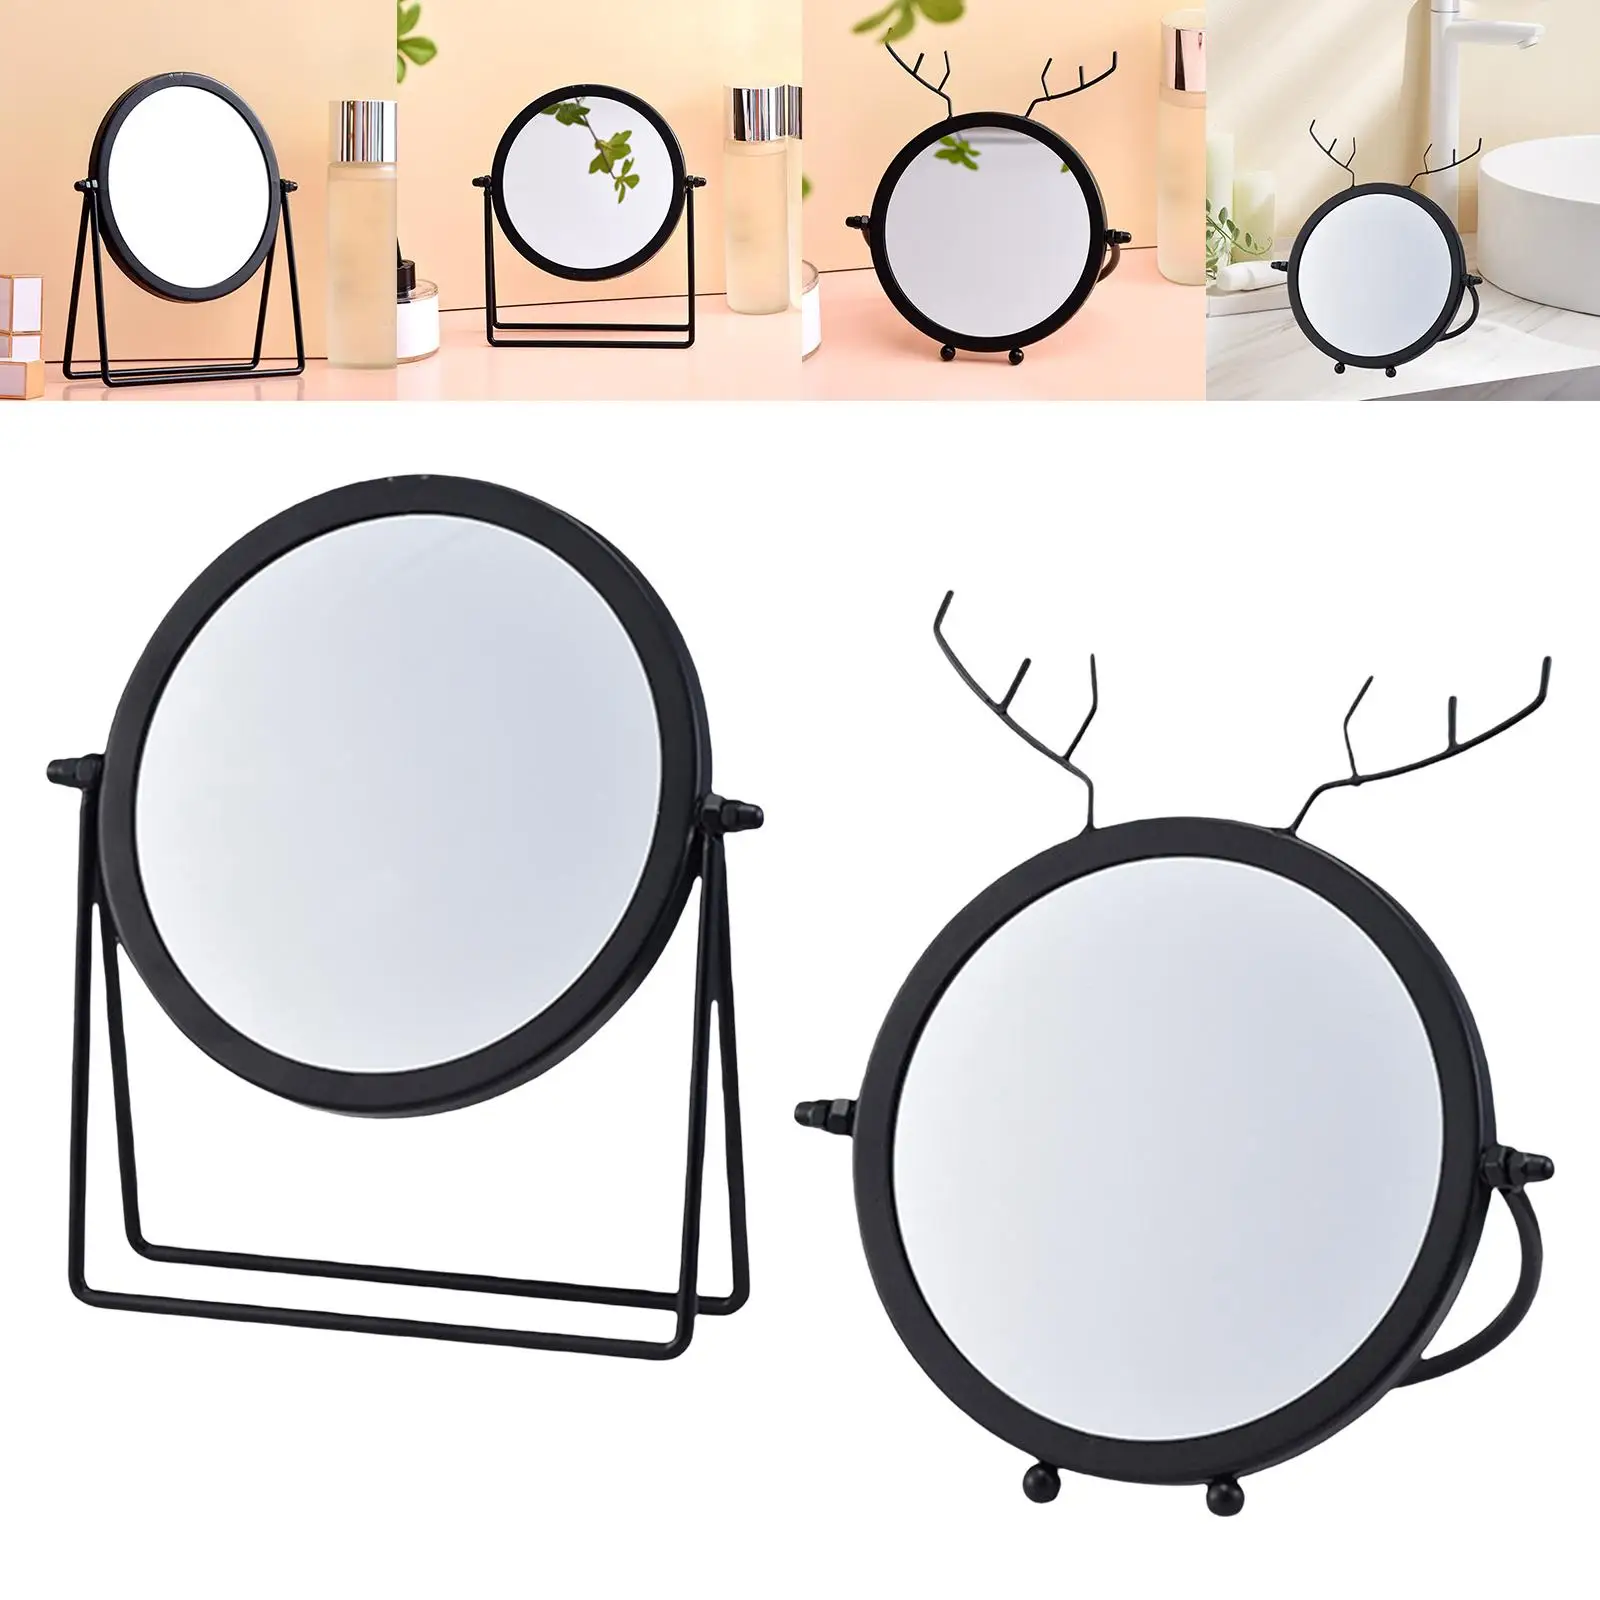 Desktop Makeup Mirror Iron Art Round Small Stand Mirror Modern 360° Rotation Mirror Table Mirror for Bedroom Tabletop Home Women